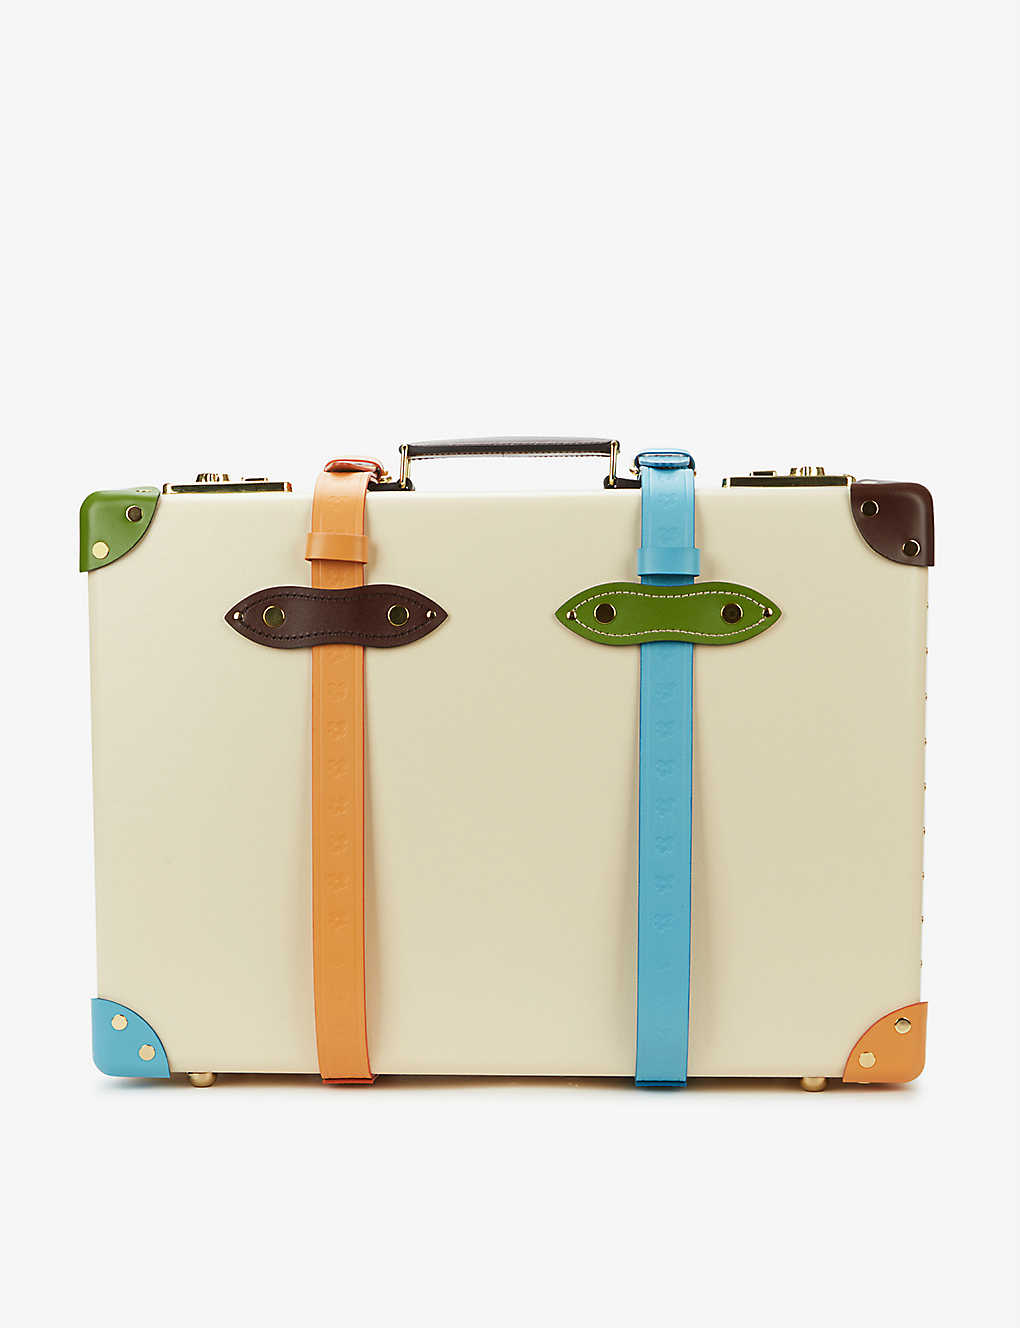 Selfridges & Co Accessories Bags Luggage 3-in-1 Scootin Suitcase 